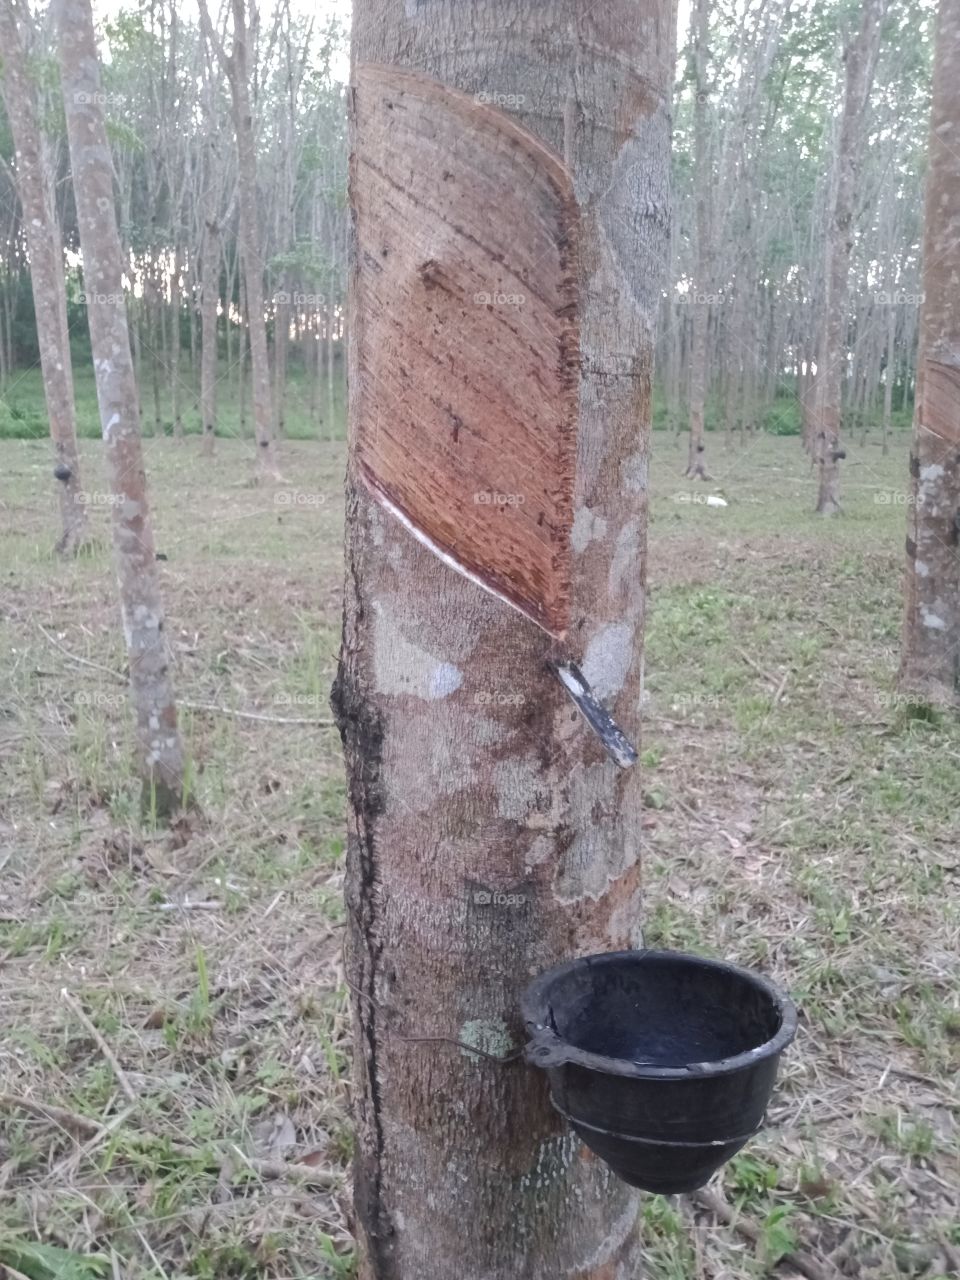 In our village, the most job here is the Rubber tapping, this is the process by which latex is collected from a rubber tree. latex used to many kind such as glove, tire, condom and etc.